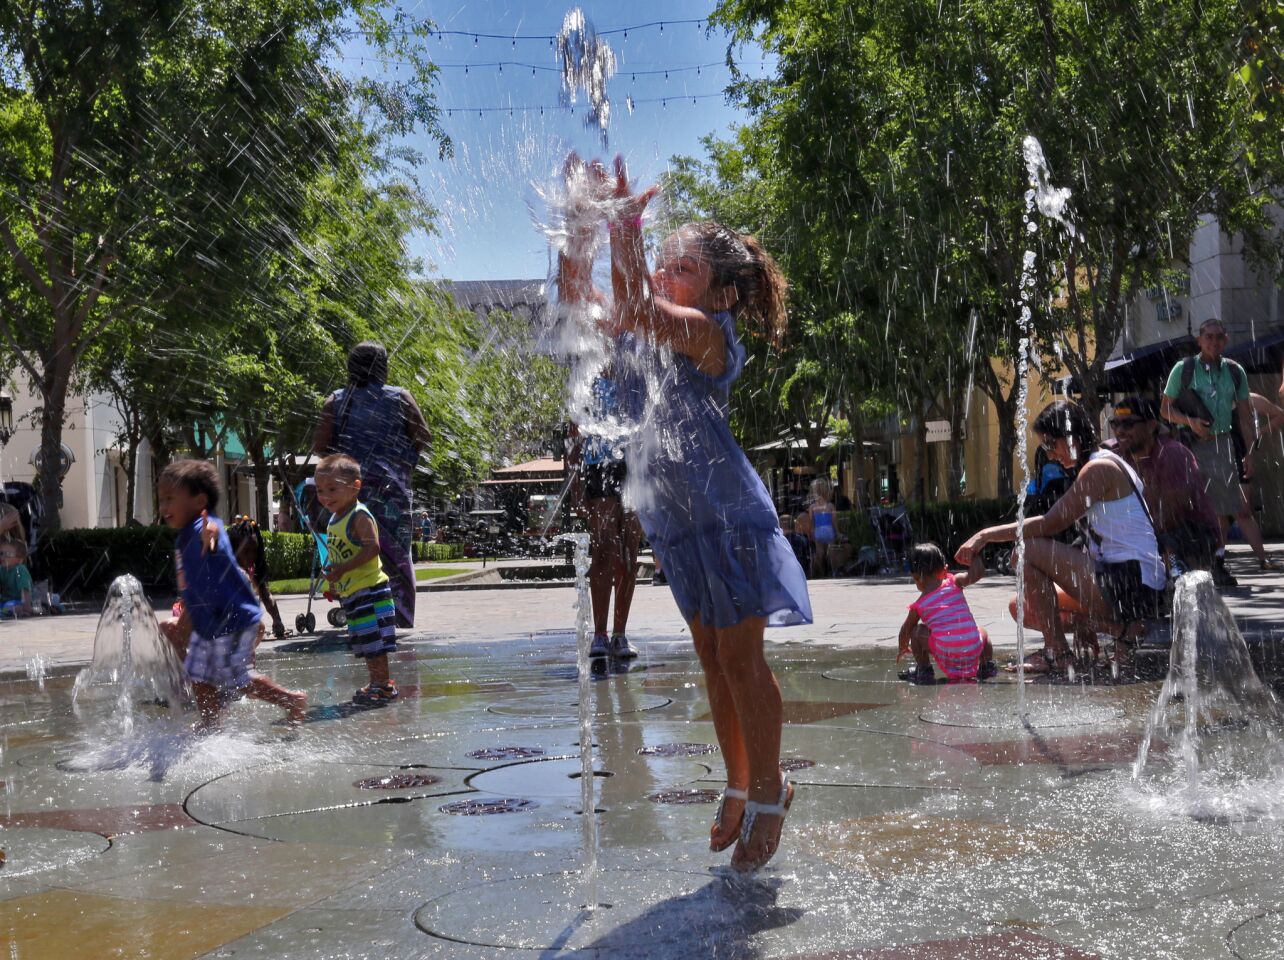 Angela Robles, 3, enjoys a water shooting fountain at Victoria Gardens on a hot afternoon in Rancho Cucamonga.